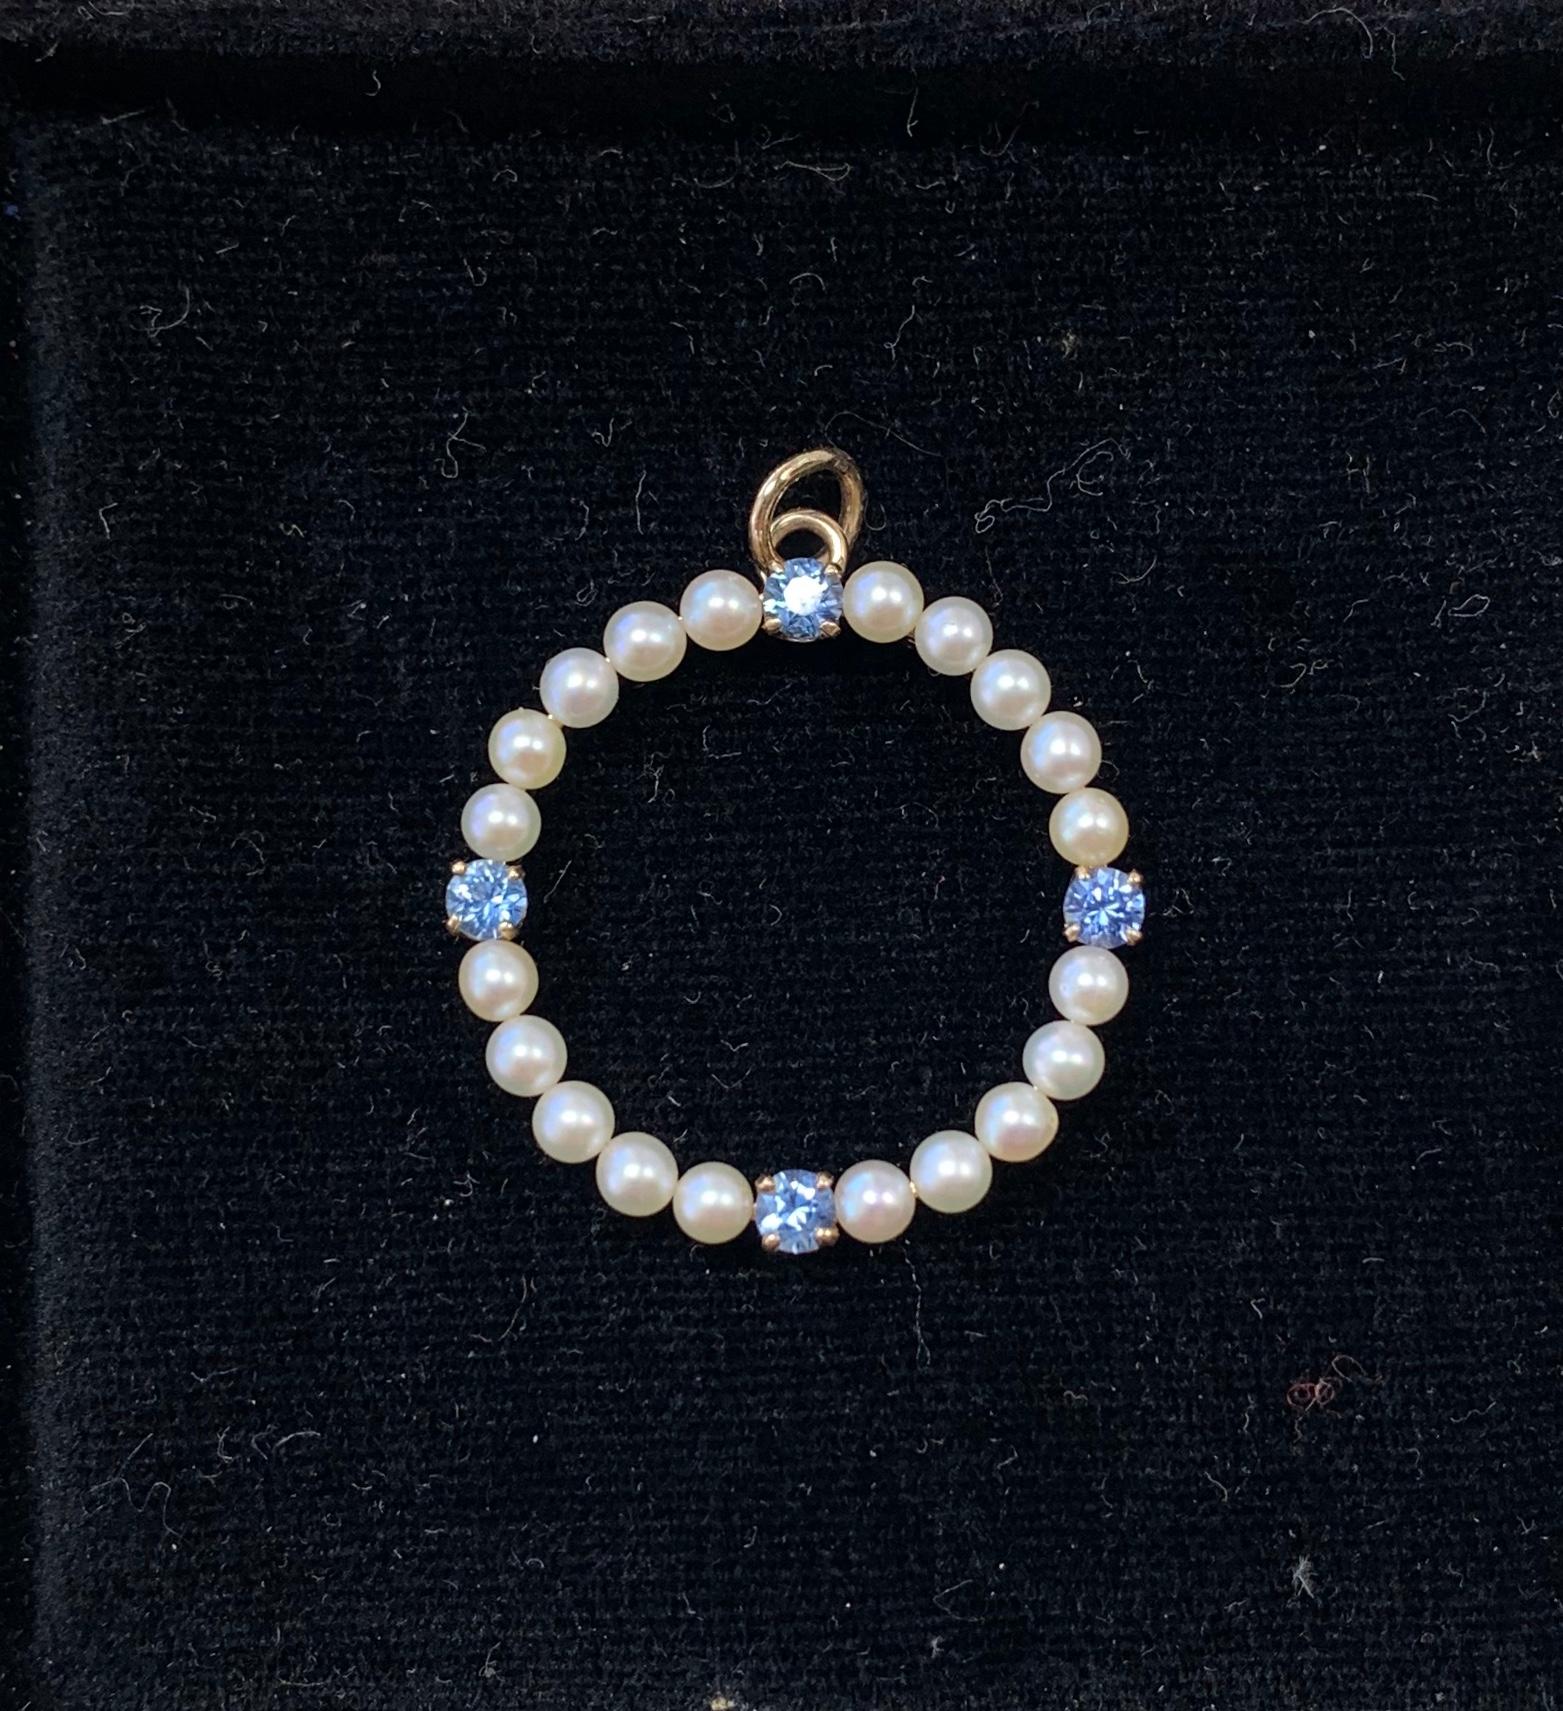 Gem Quality Natural Sapphire Art Deco Pearl Circle Pendant Antique Necklace Gold In Good Condition For Sale In New York, NY